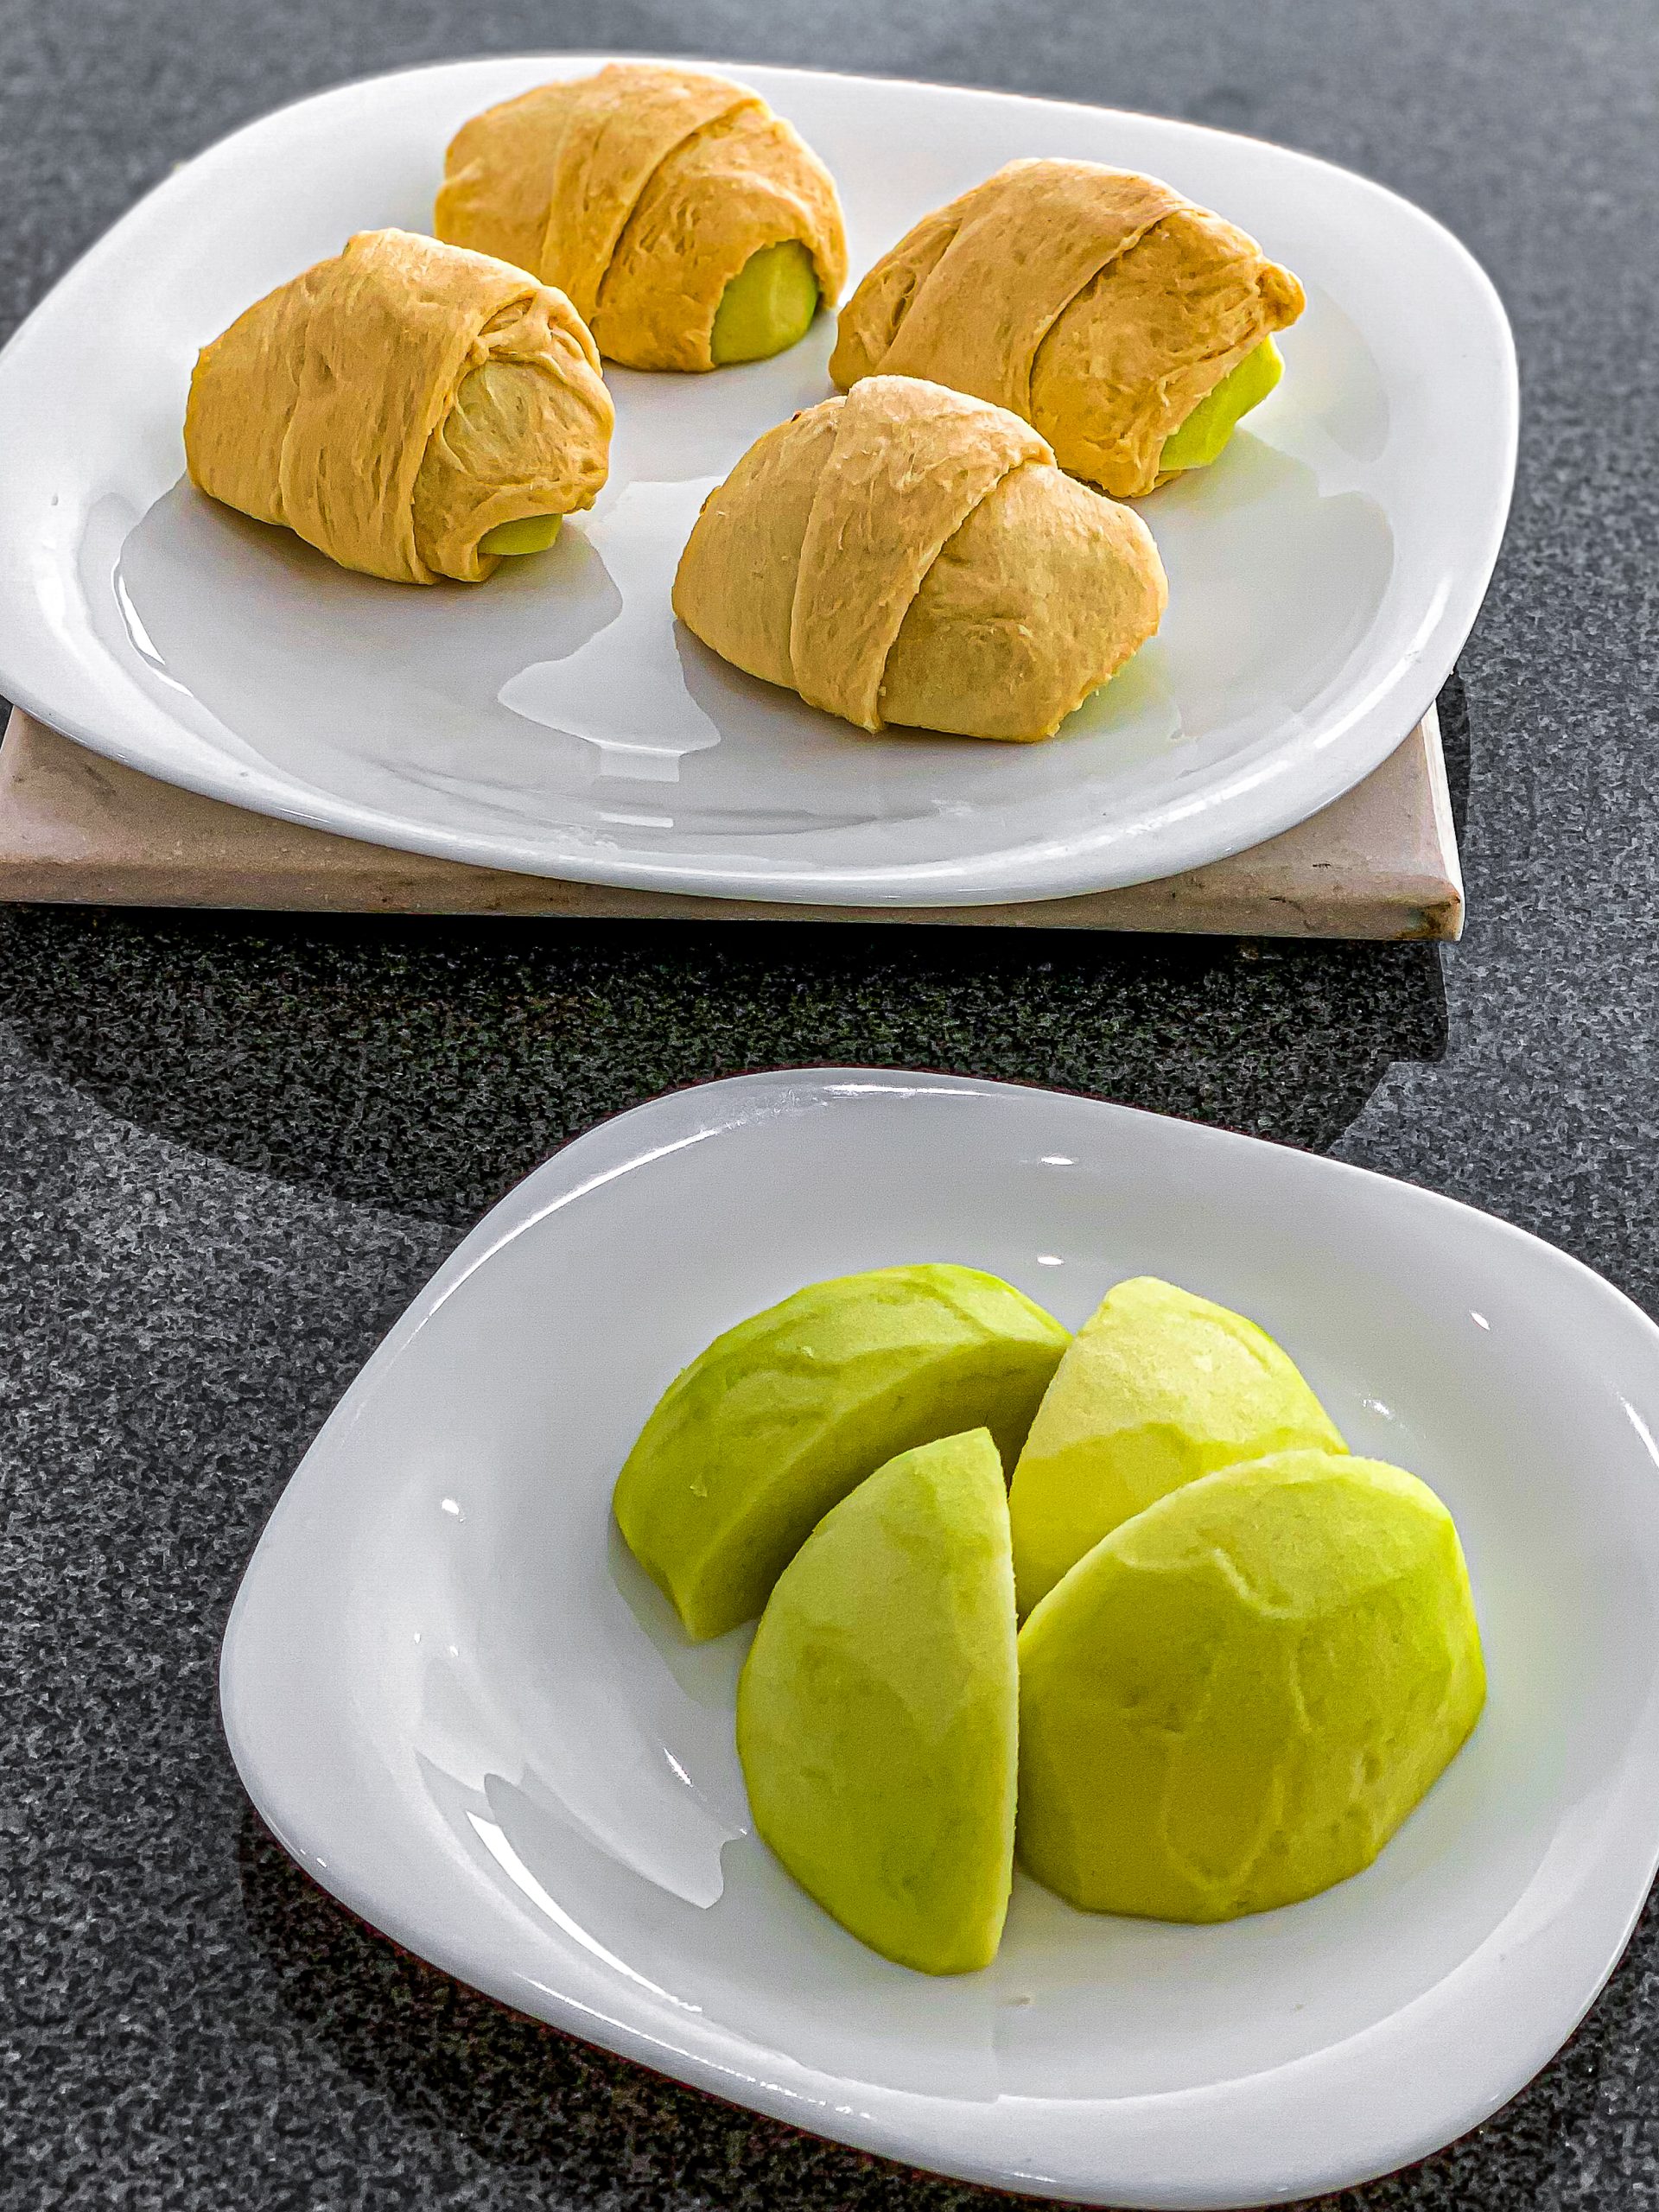 Take the rolls out of the can and wrap each apple piece in one crescent roll.